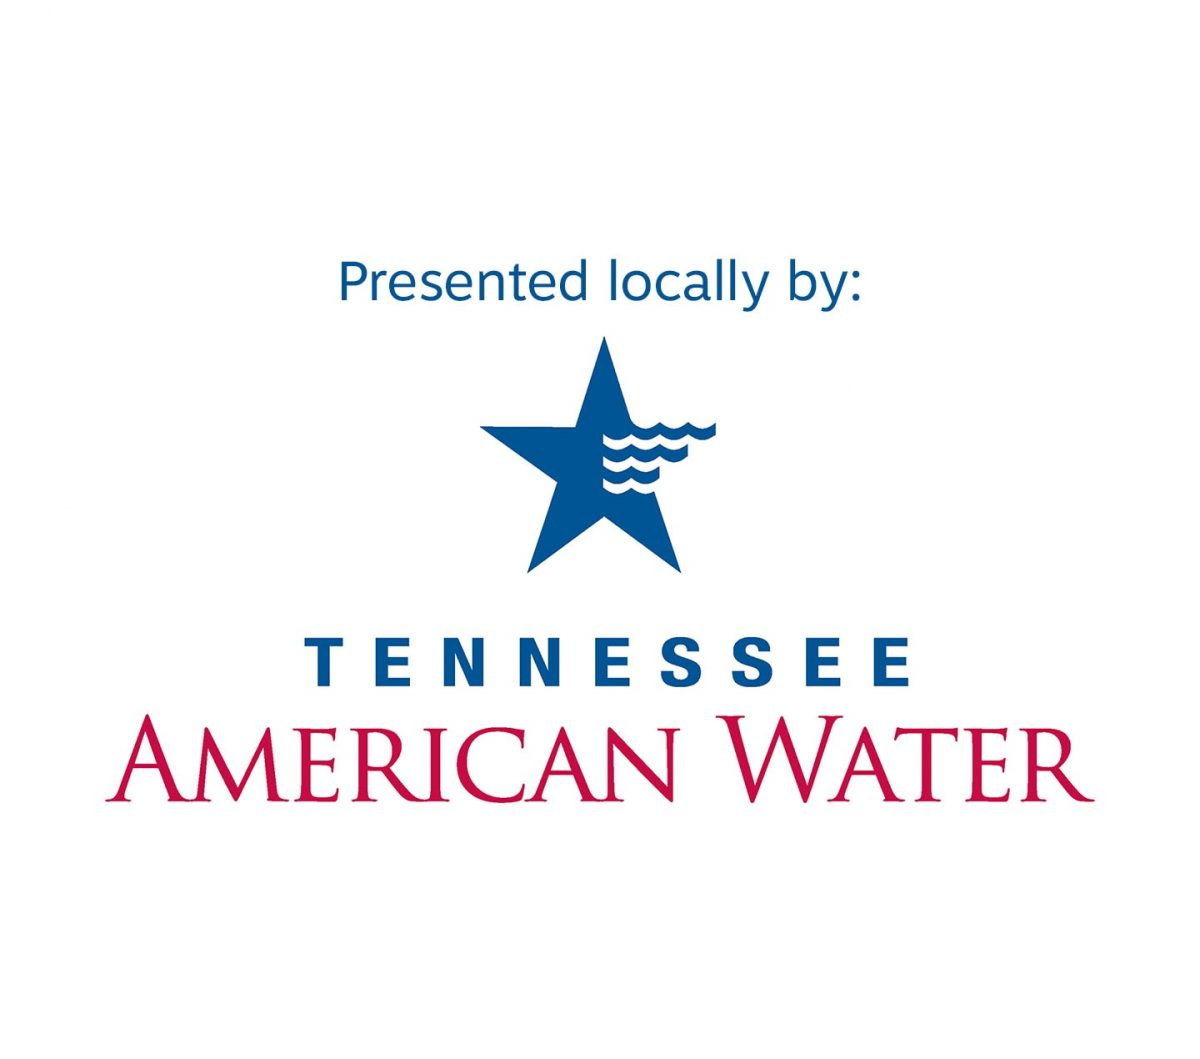 Presented locally by Tennessee American Water